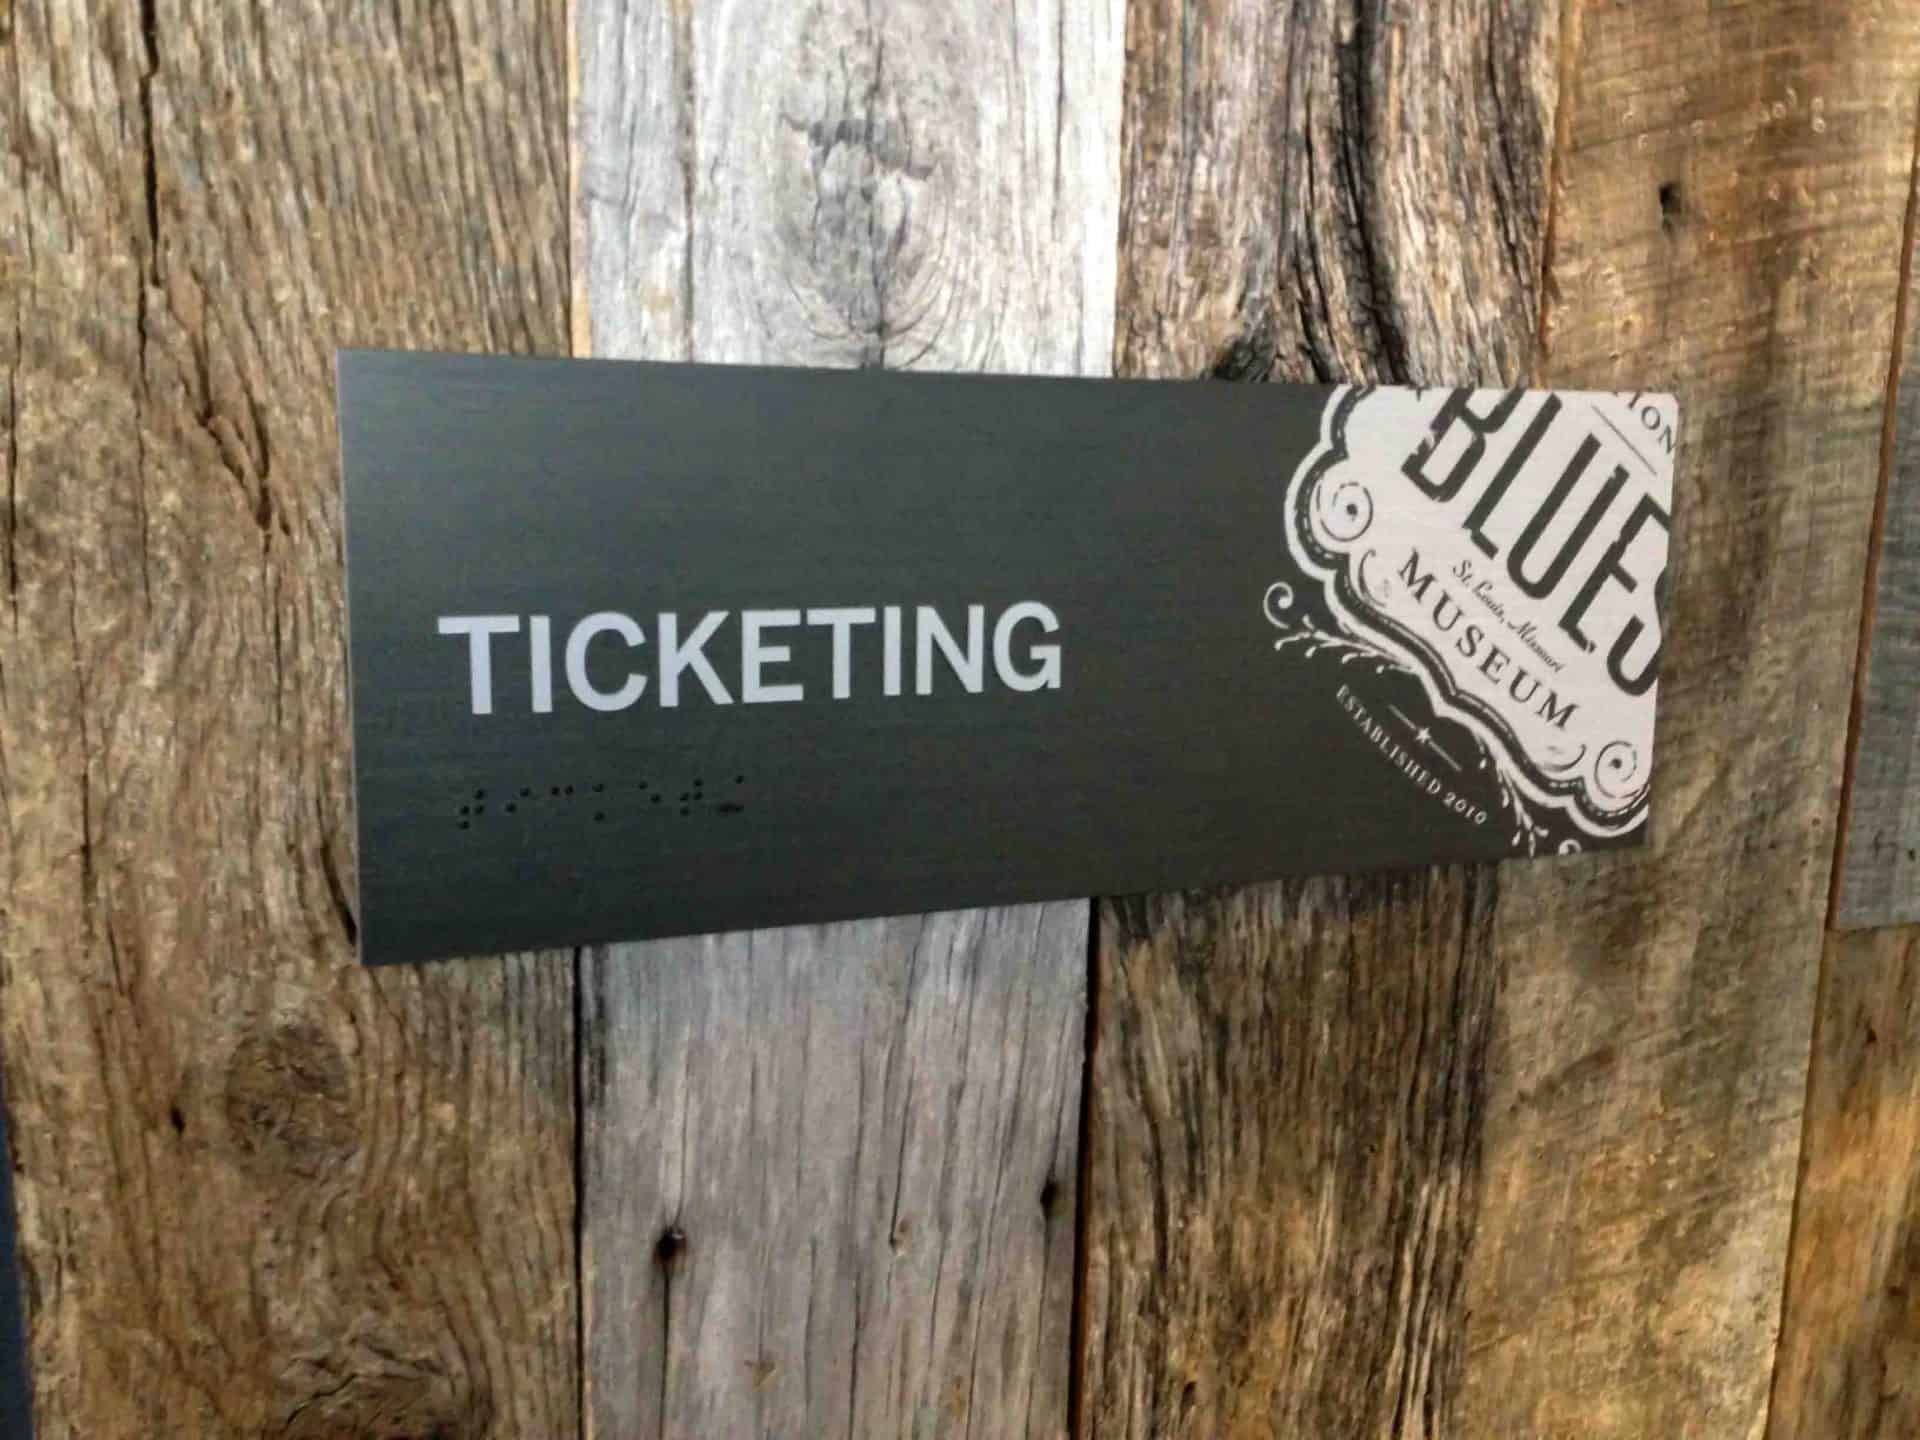 Custom ticketing office sign at the national blues museum installed on weathered wood